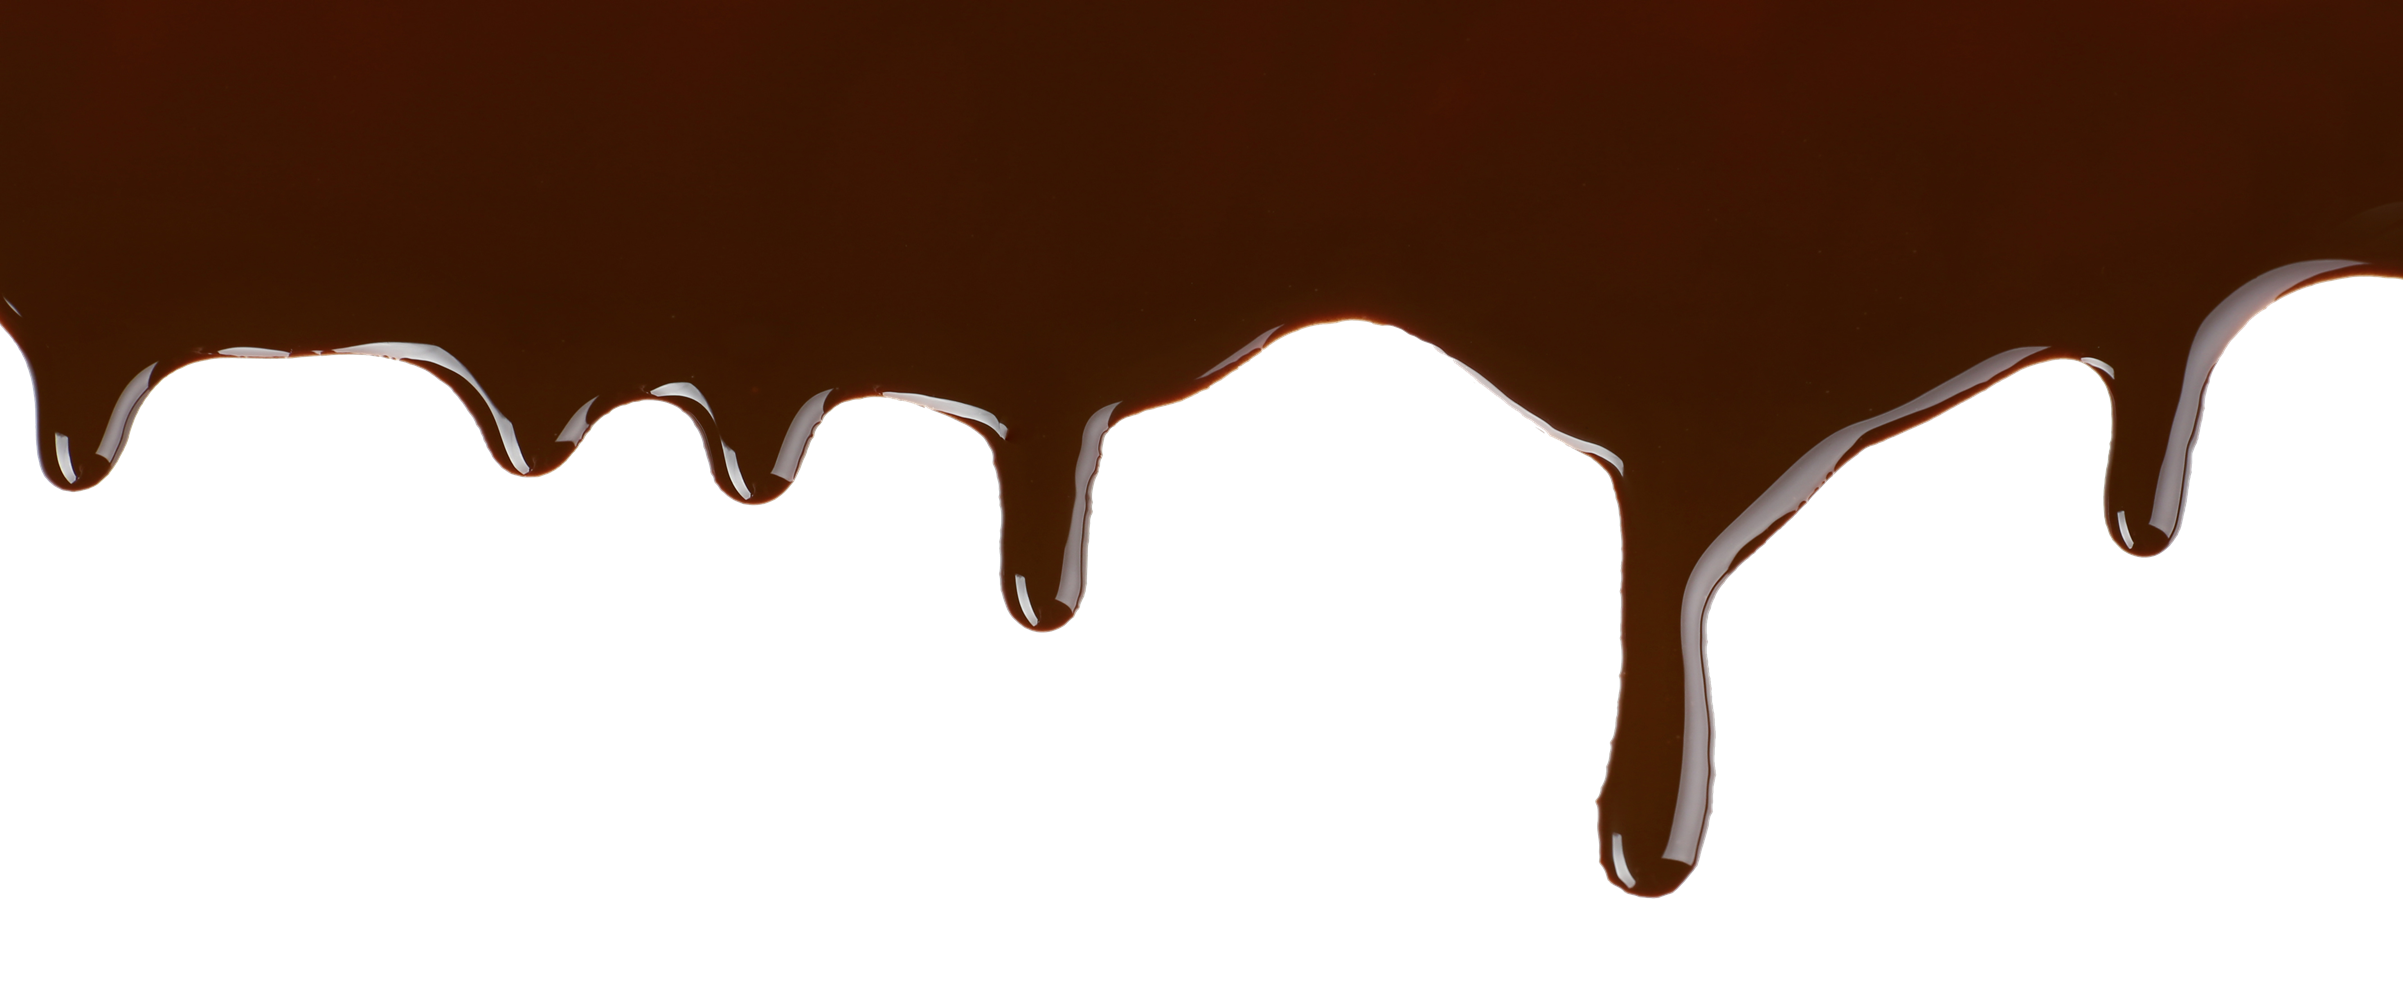 Melted Chocolate PNG Image